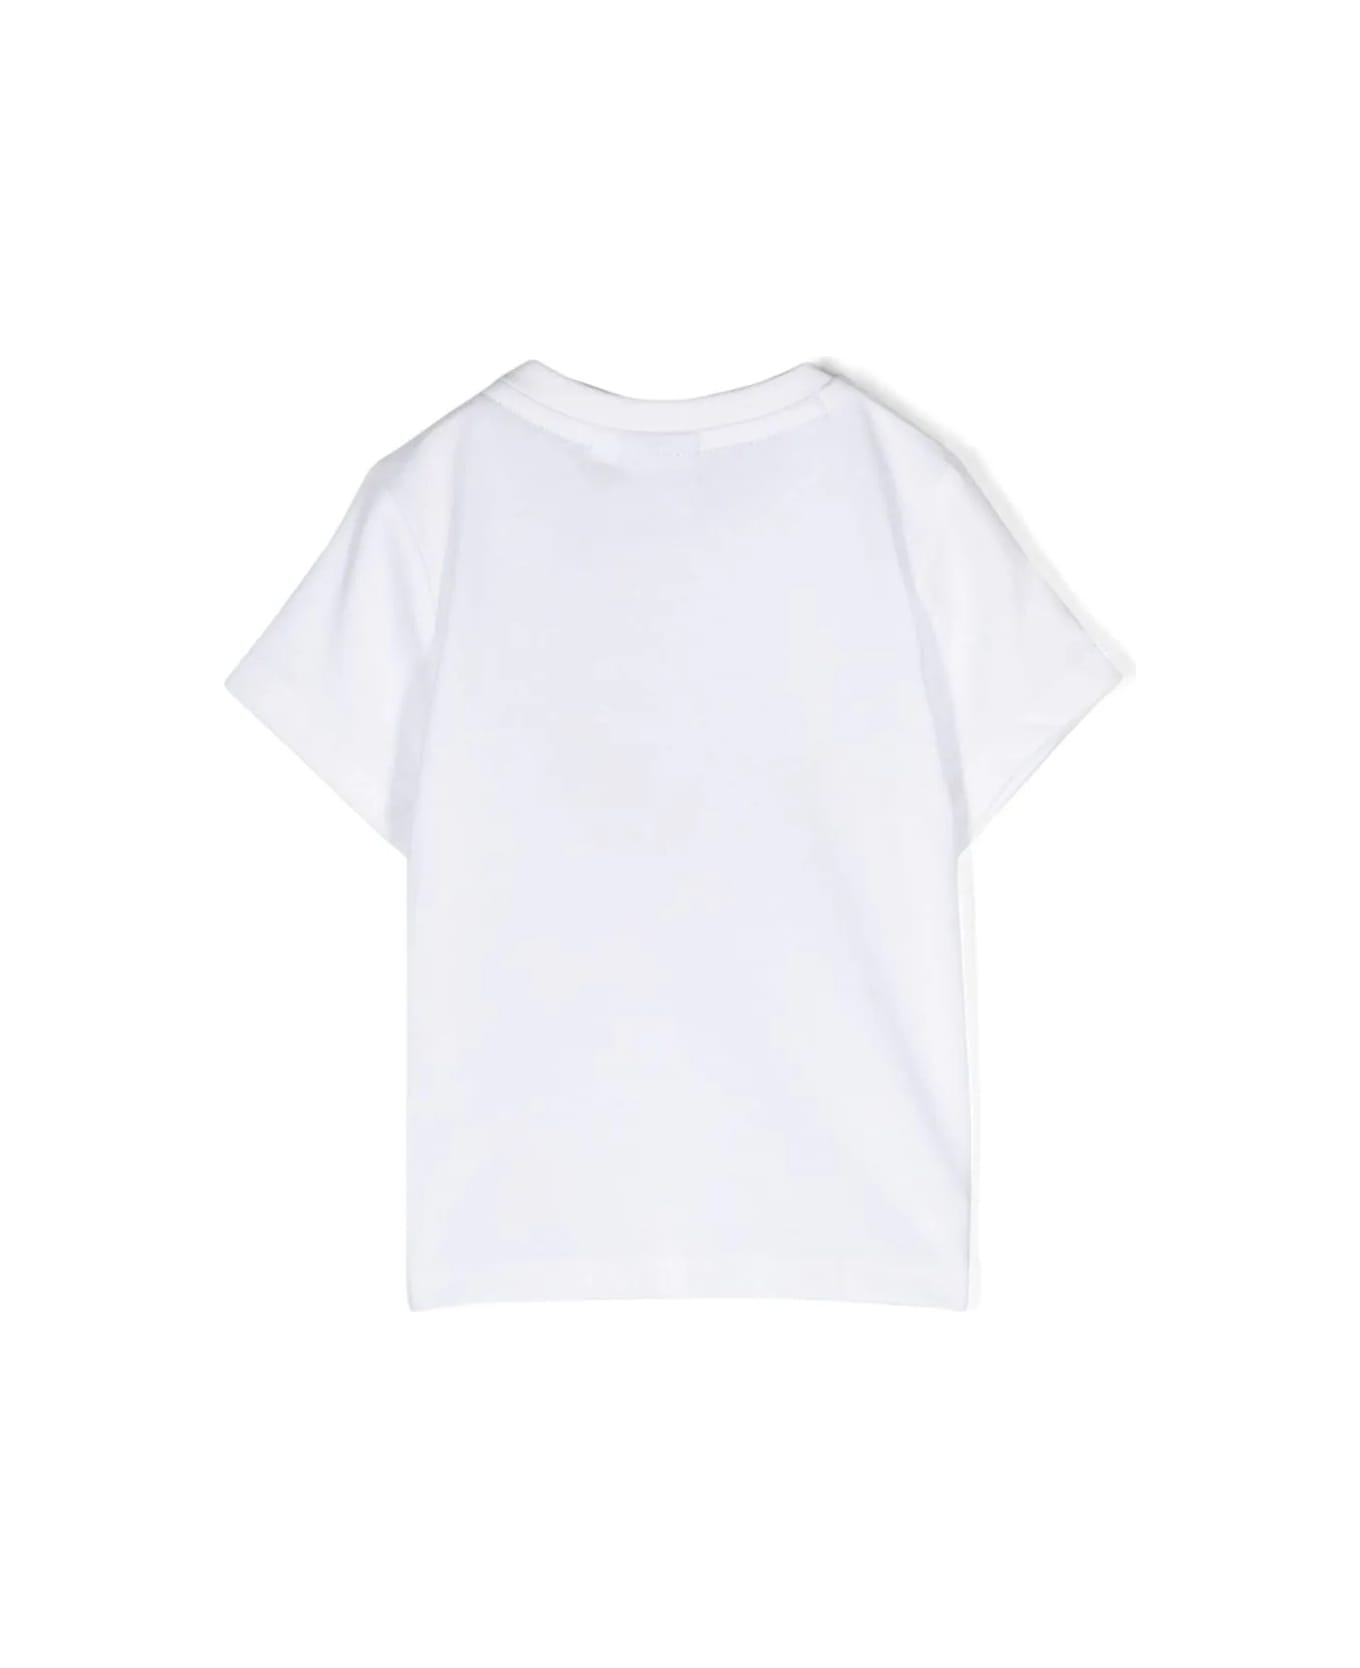 Hugo Boss T-shirt With Print - White Tシャツ＆ポロシャツ